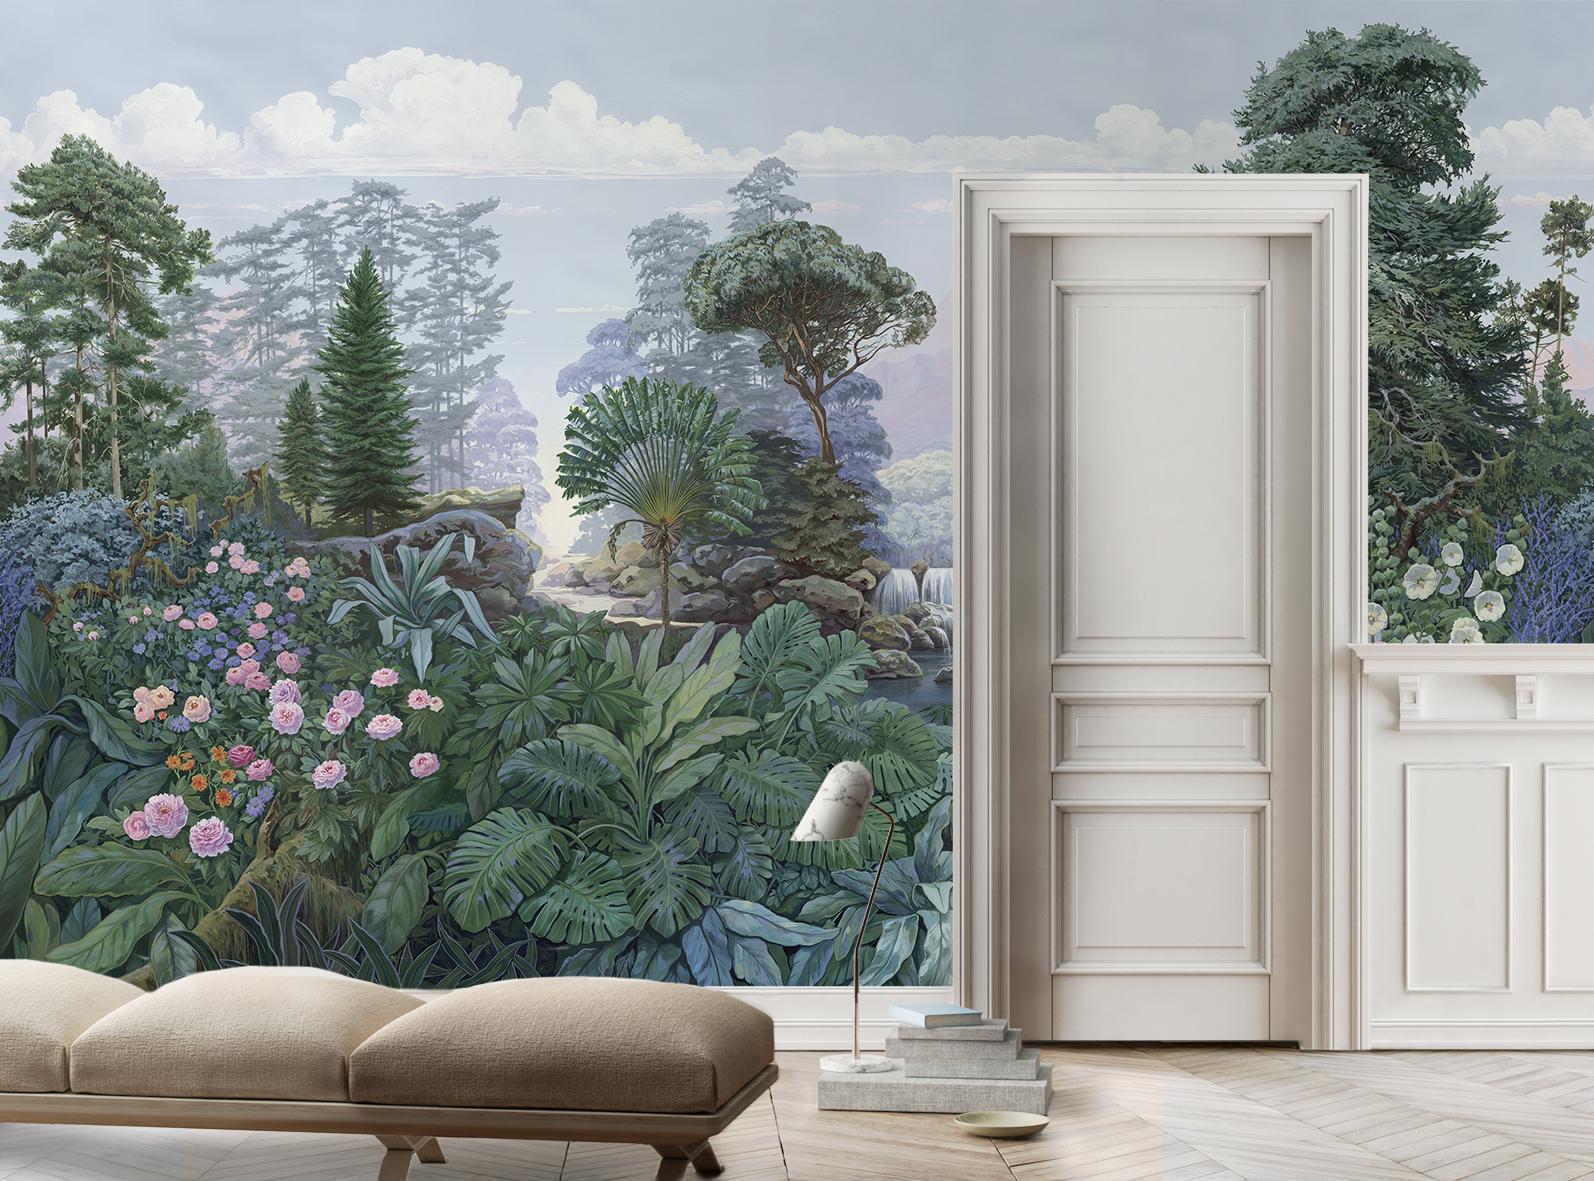 All our products are custom made. The price per square meter is 91$. The price shown is for a 350cm wide by 250cm high wall.

The model for this large format panoramic set is an original oil painting handmade by Denis Berteau for Isidore Leroy. The